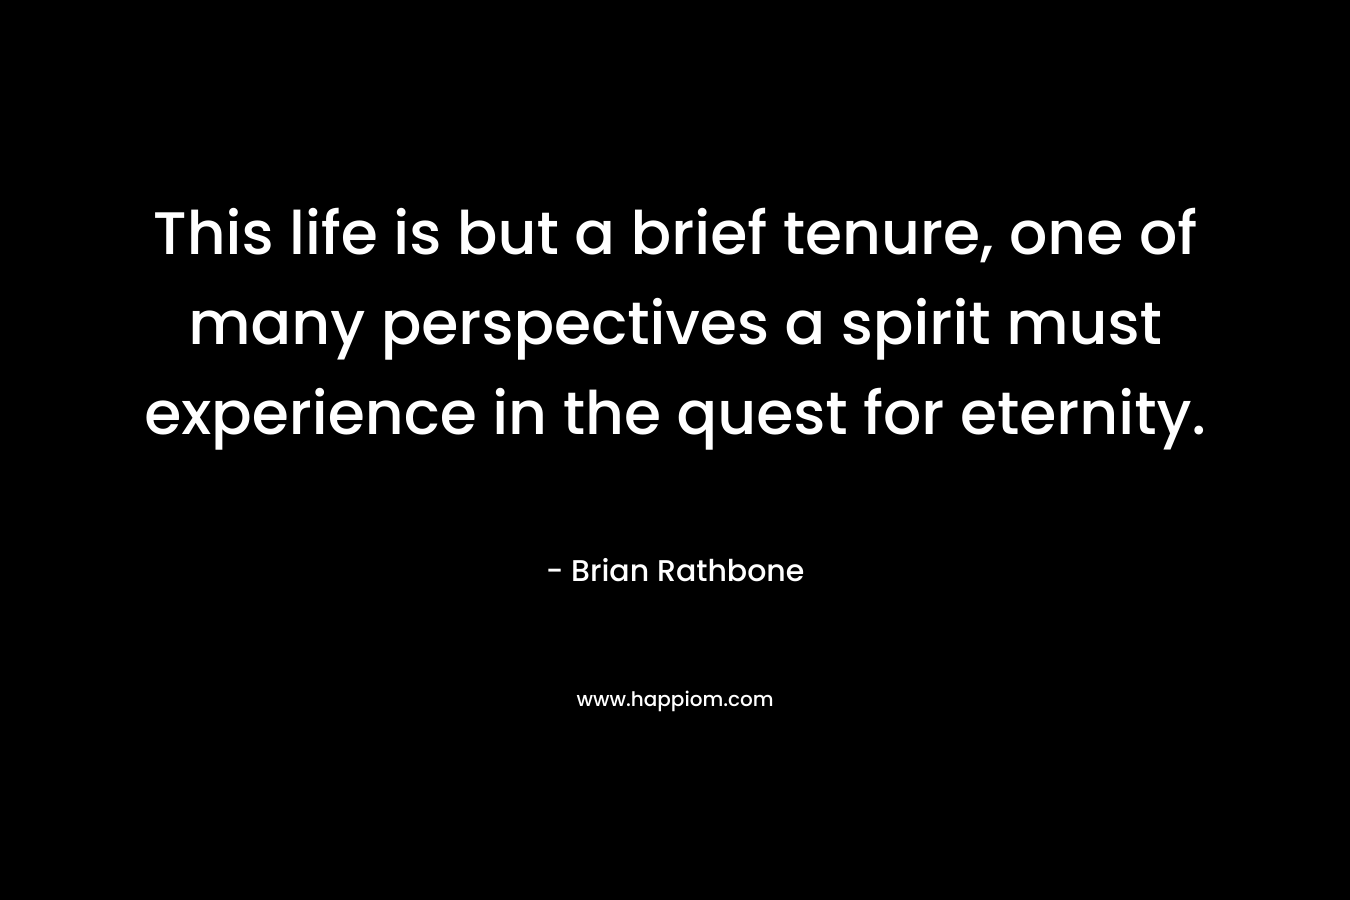 This life is but a brief tenure, one of many perspectives a spirit must experience in the quest for eternity. – Brian Rathbone